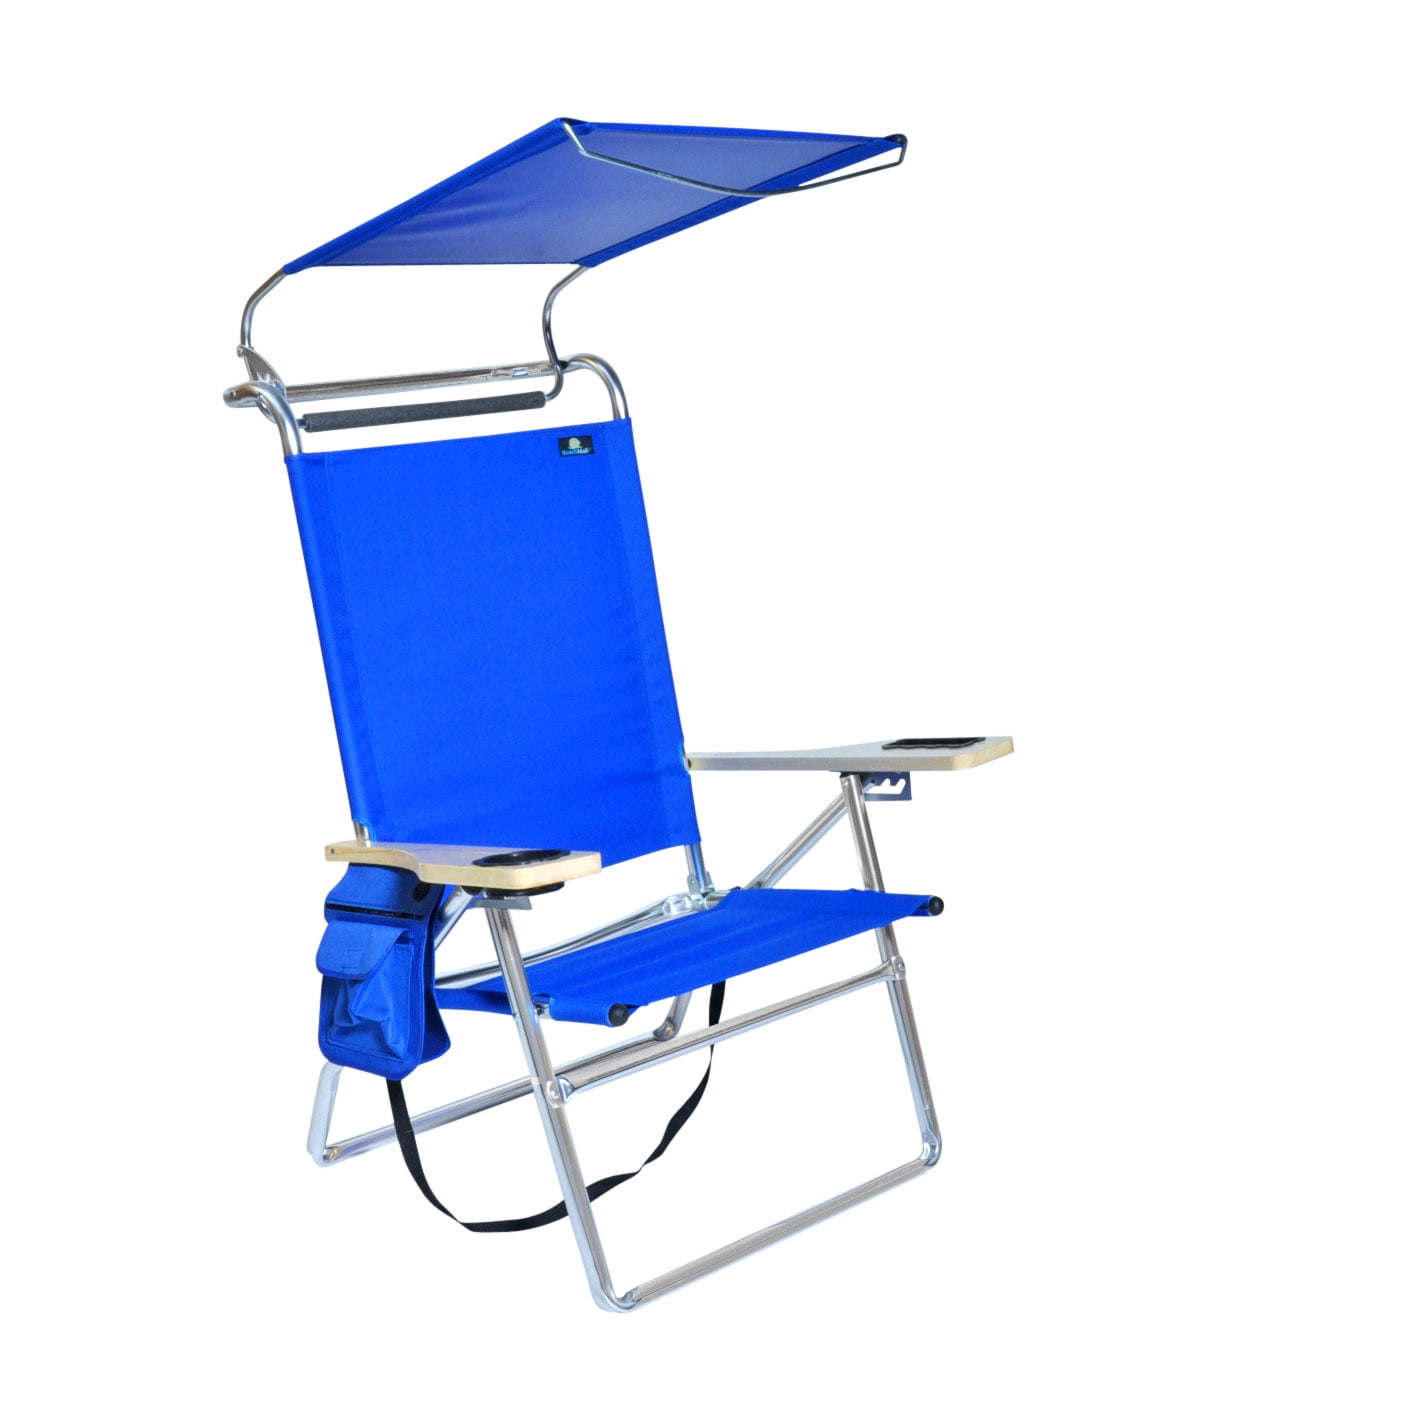 Unique Beachmall Beach Chair With Drink Holder And Storage Pouch for Simple Design